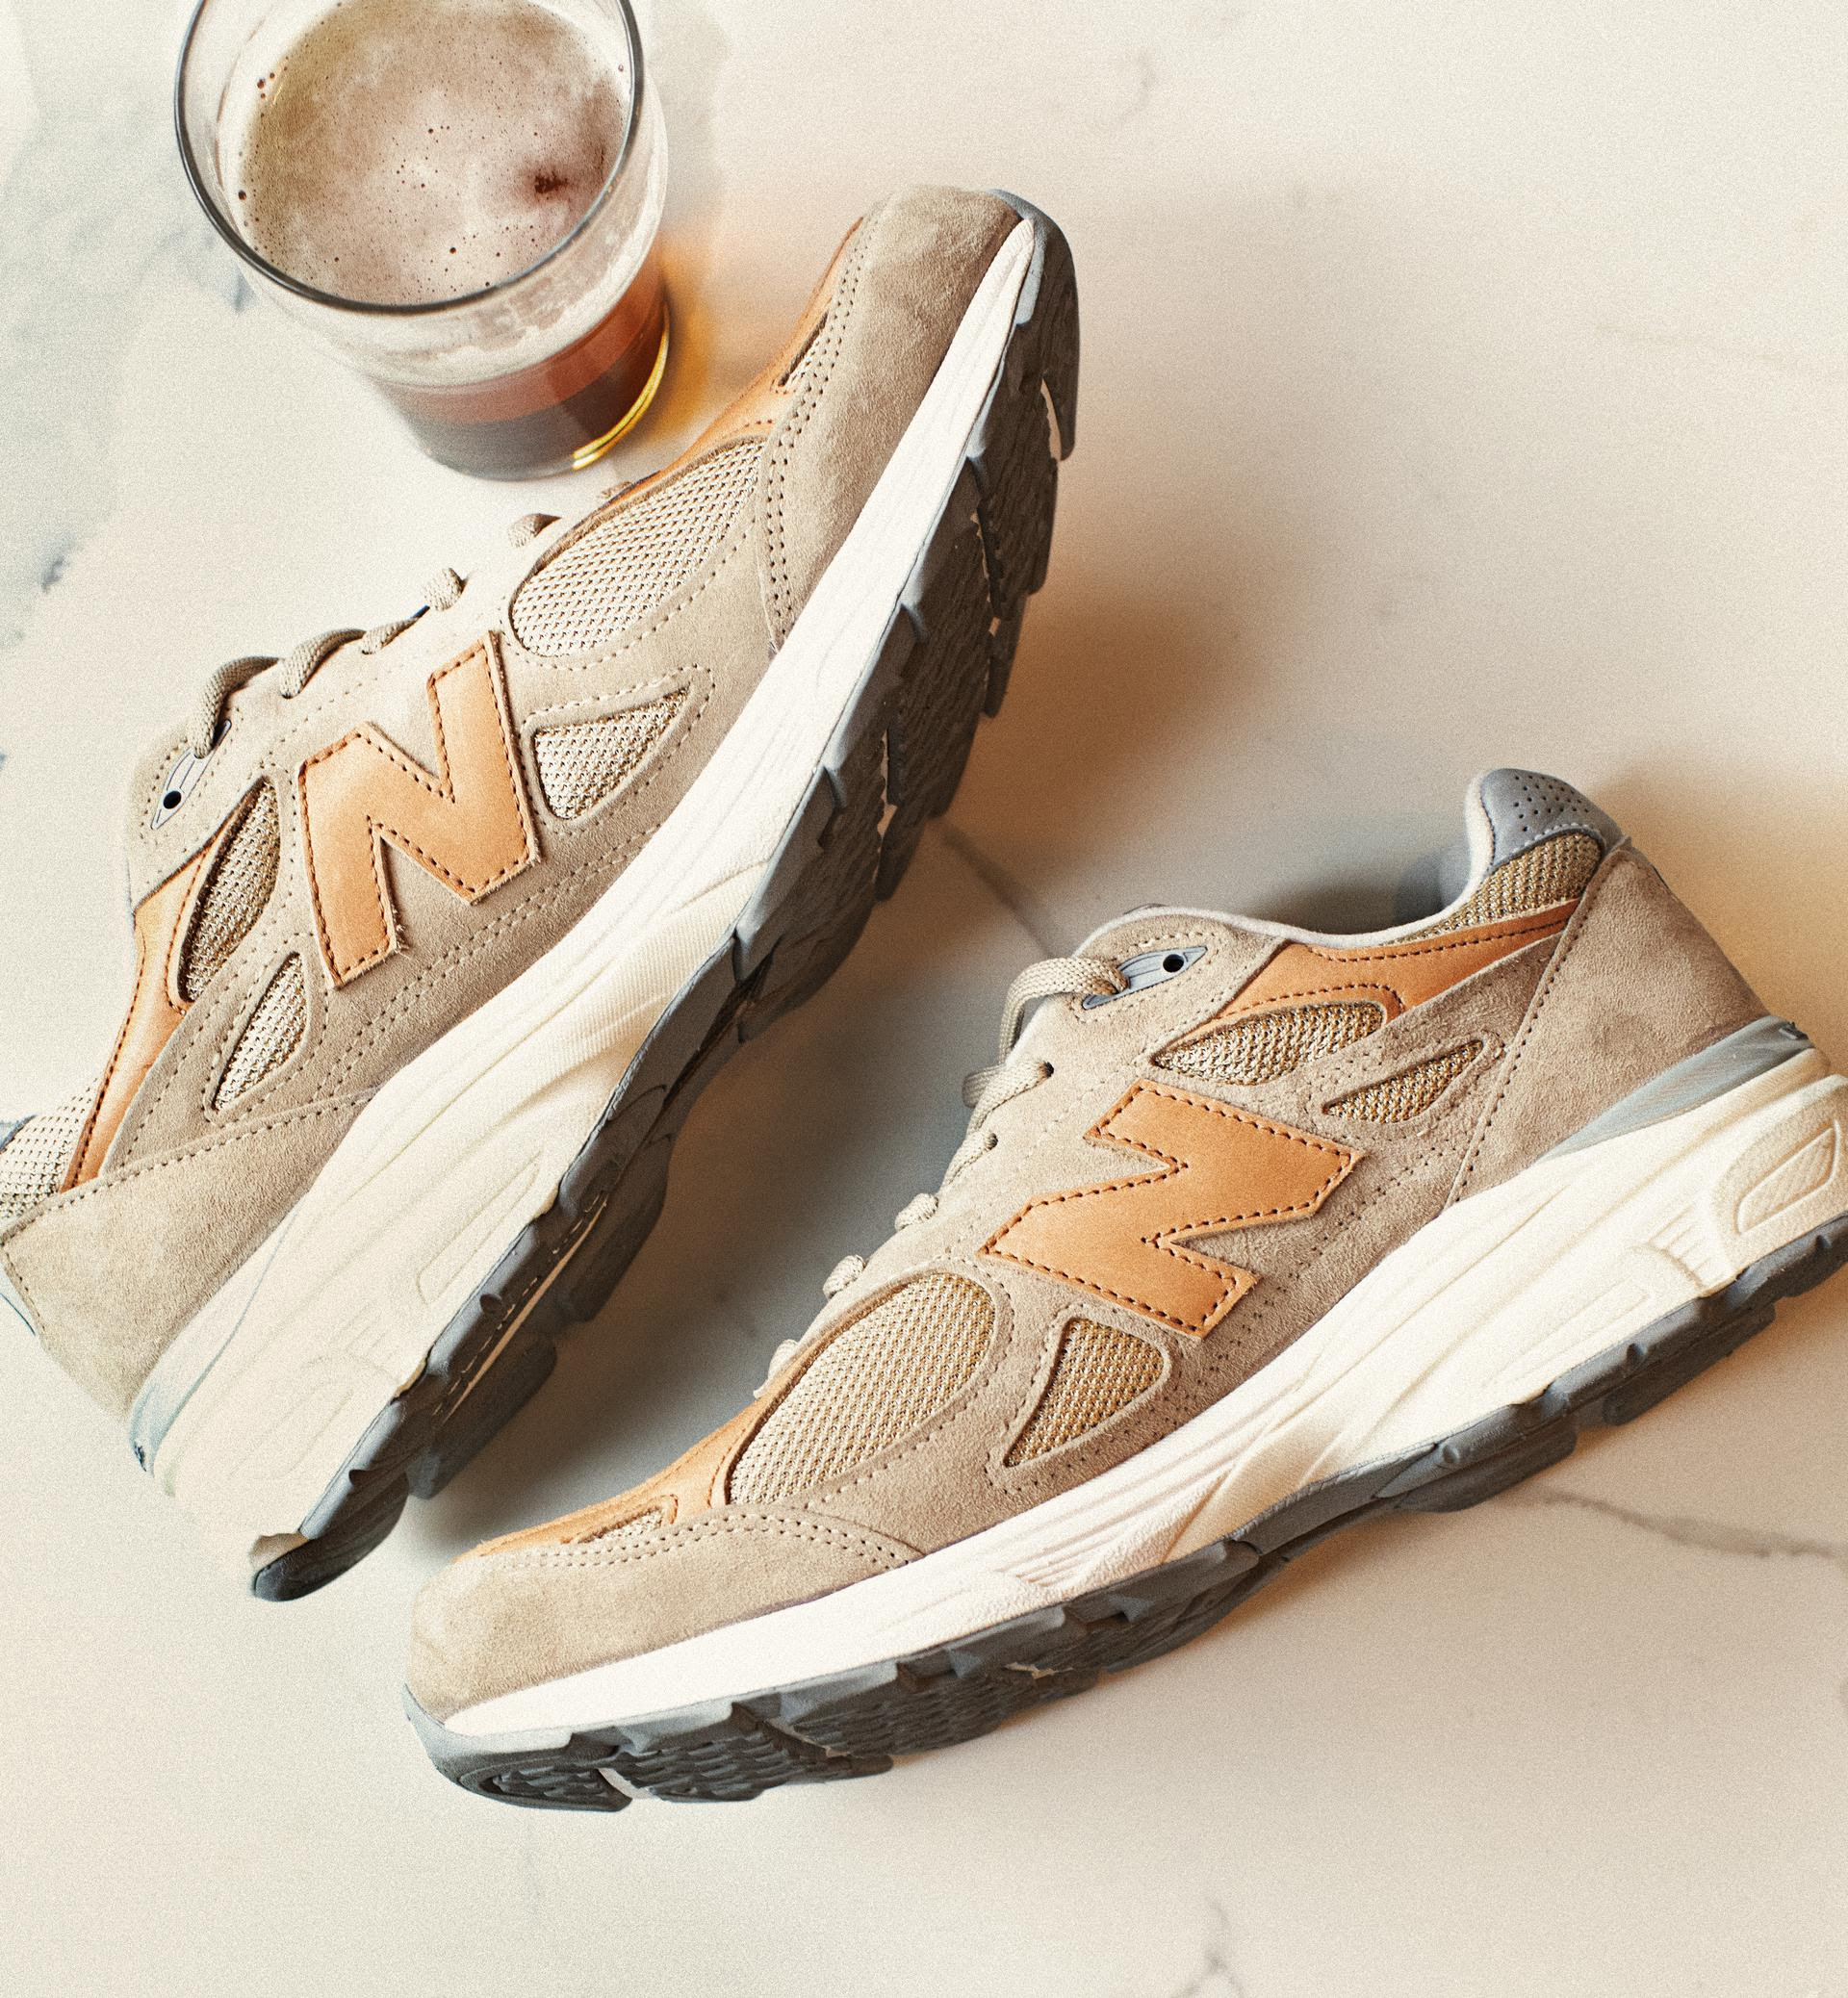 Todd Snyder x New Balance Introduce the 